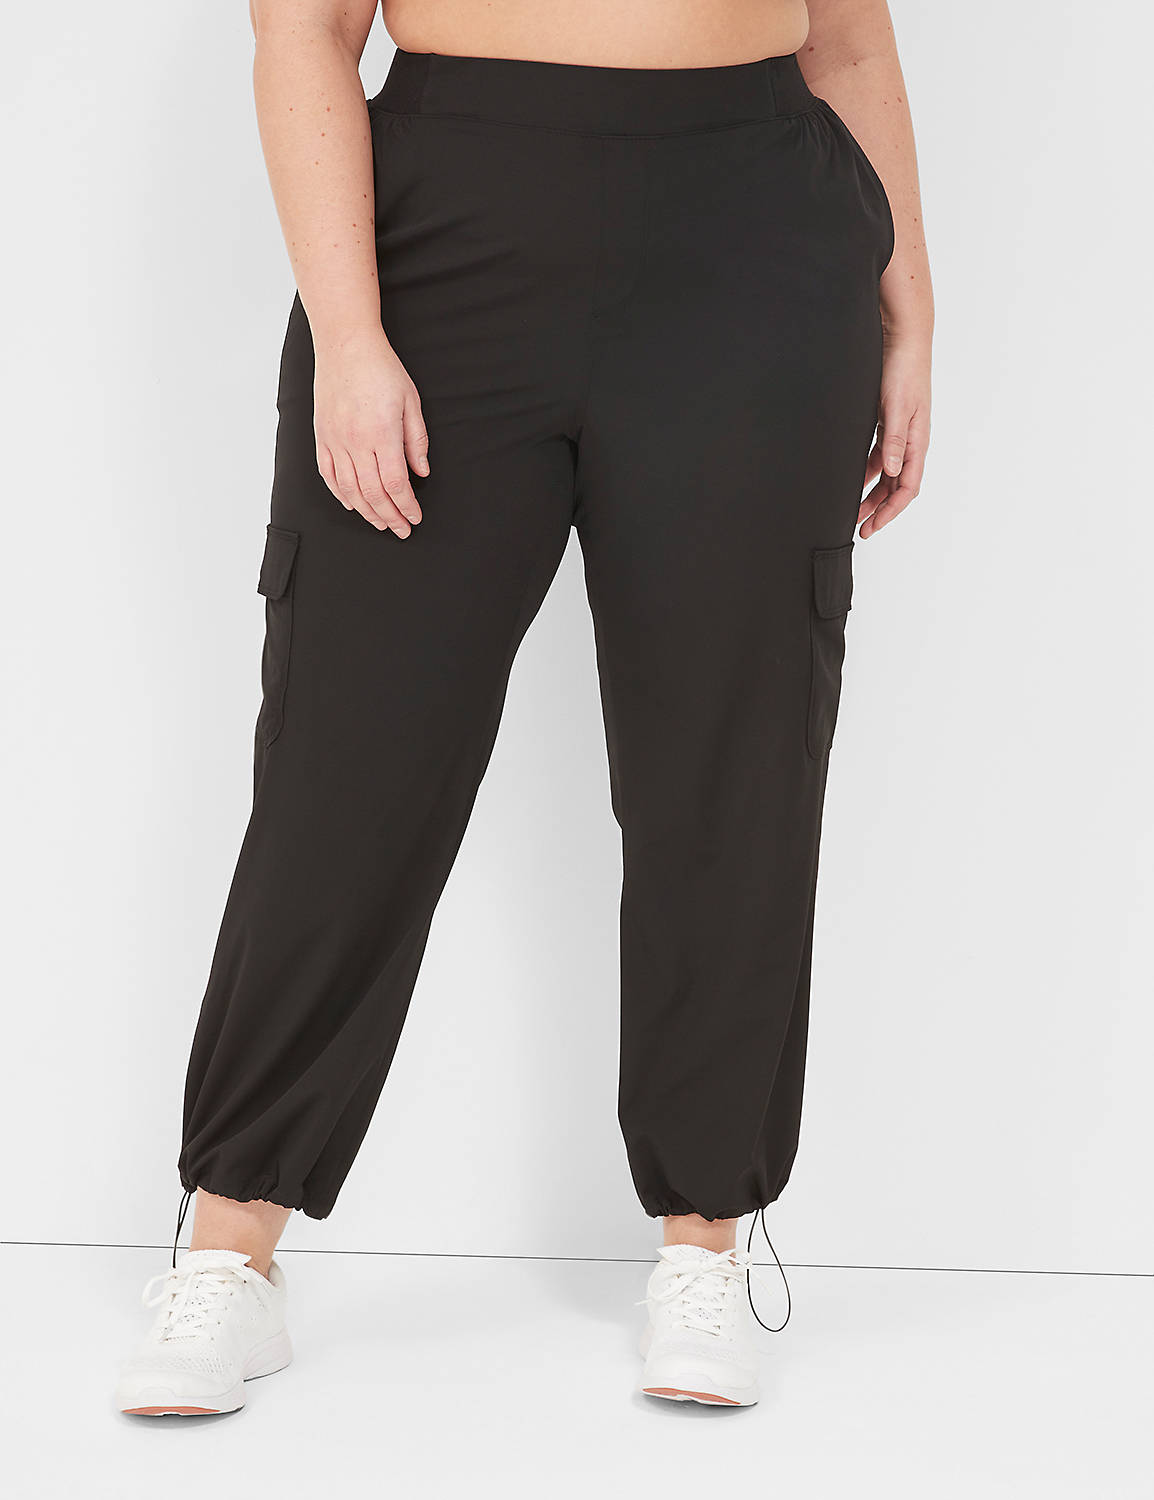 LIVI Mid Rise Stretch Woven Full Le Product Image 1